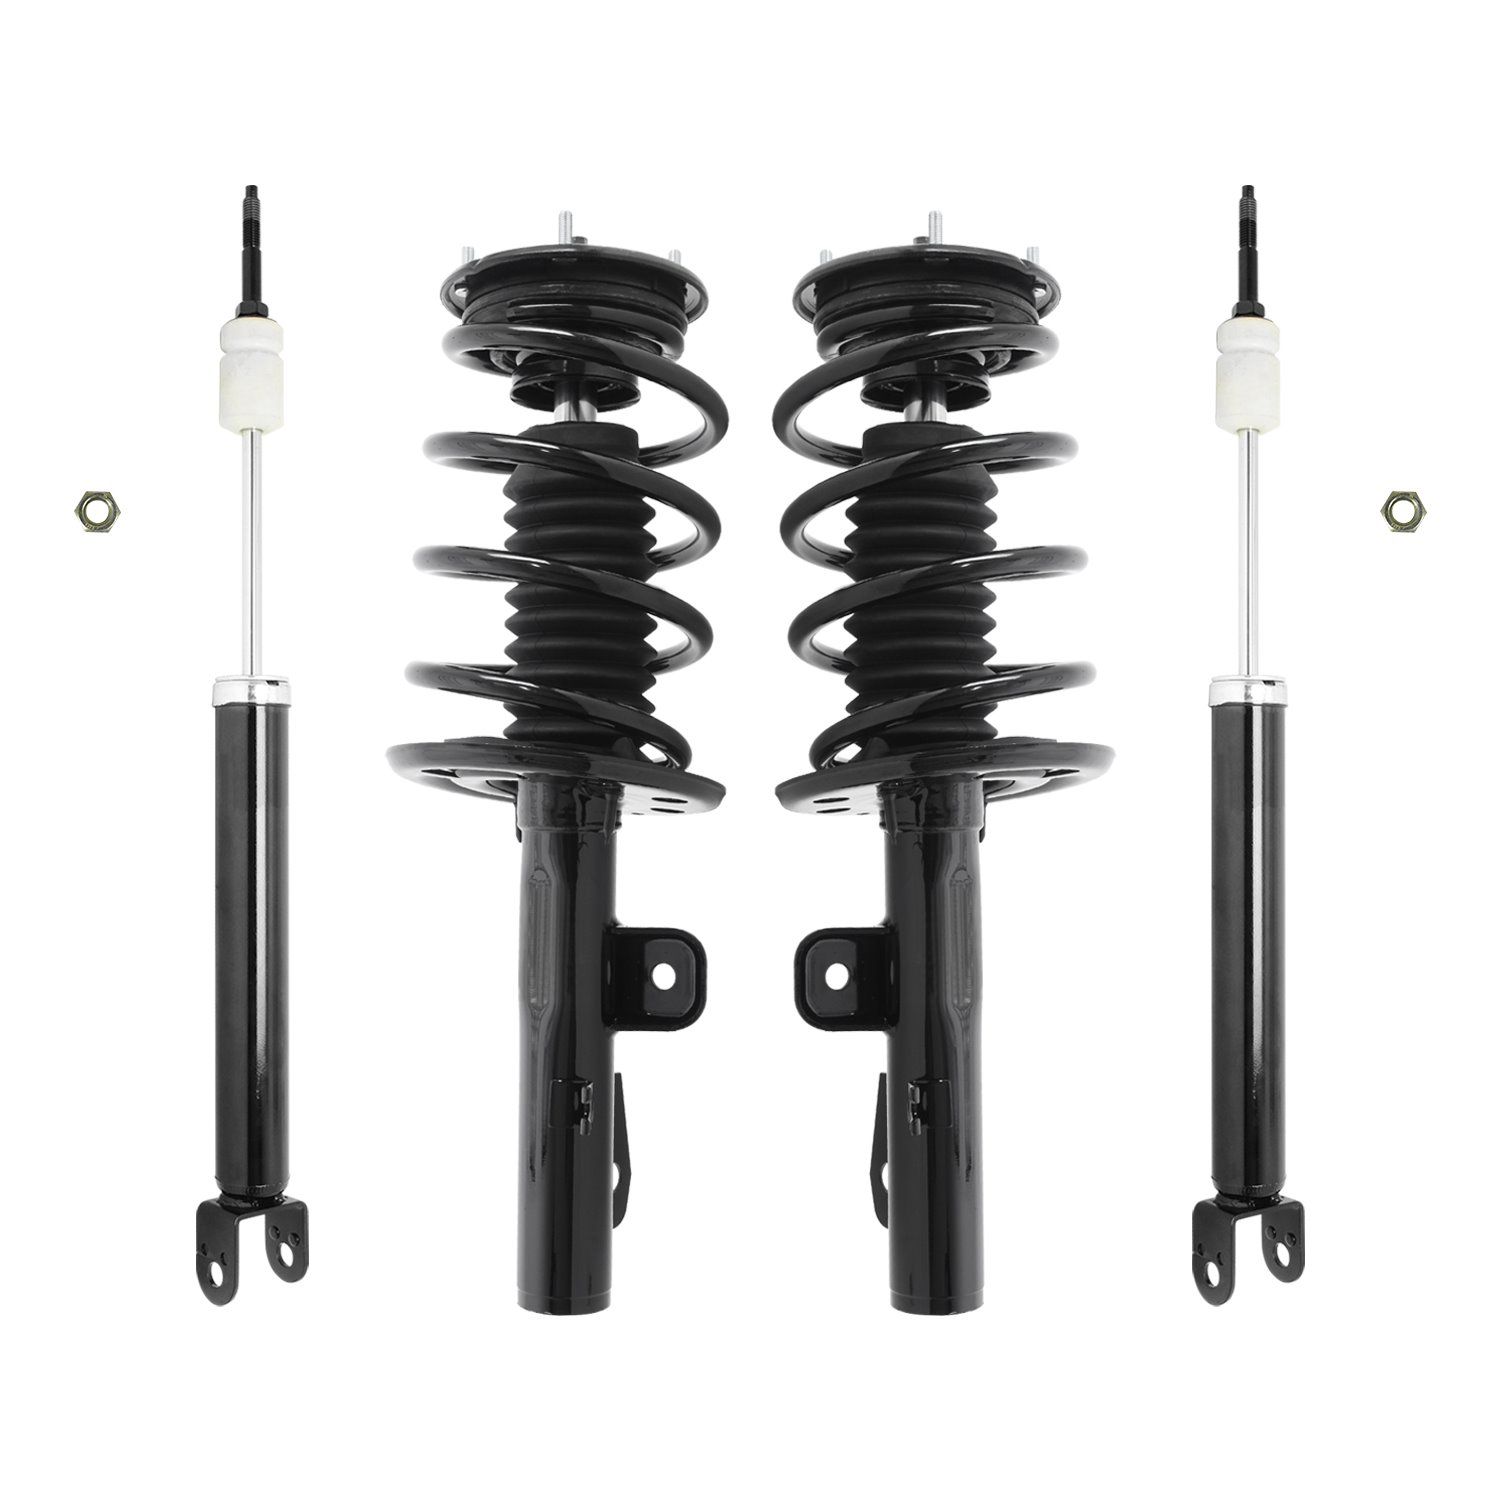 4-11013-252120-001 Front & Rear Suspension Strut & Coil Spring Assembly Fits Select Ford Flex